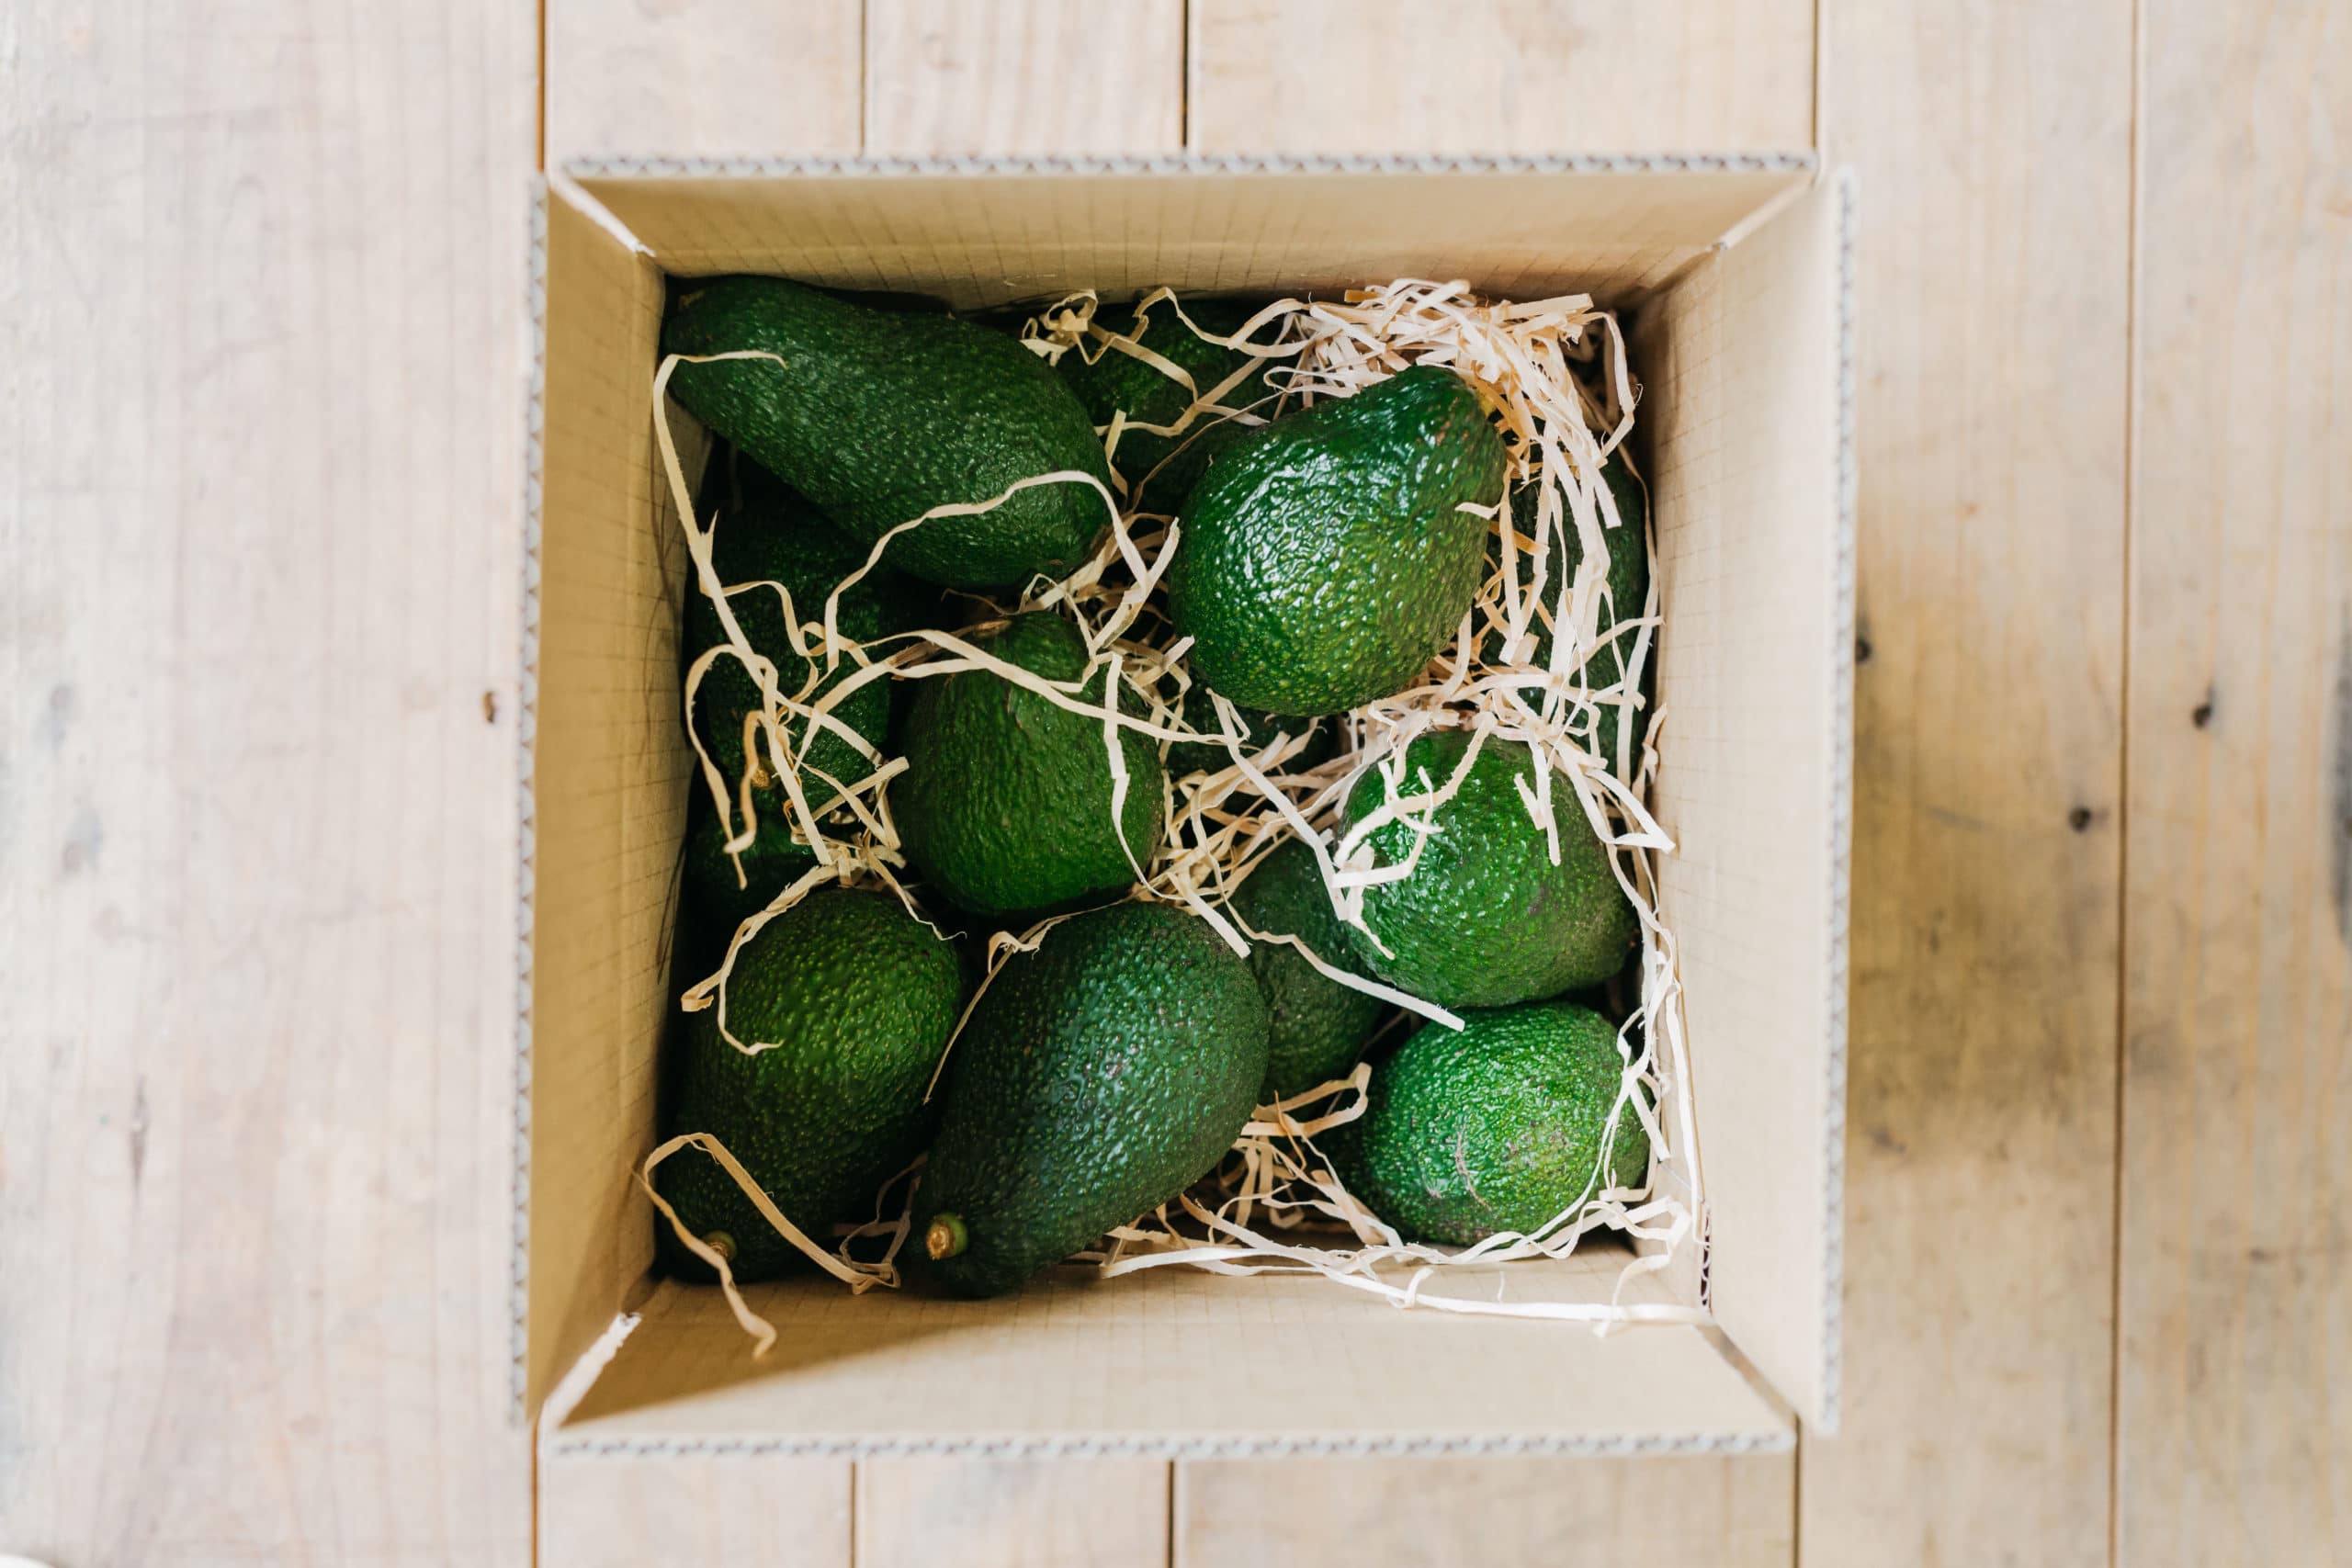 How To Store Avocados To Last Longer